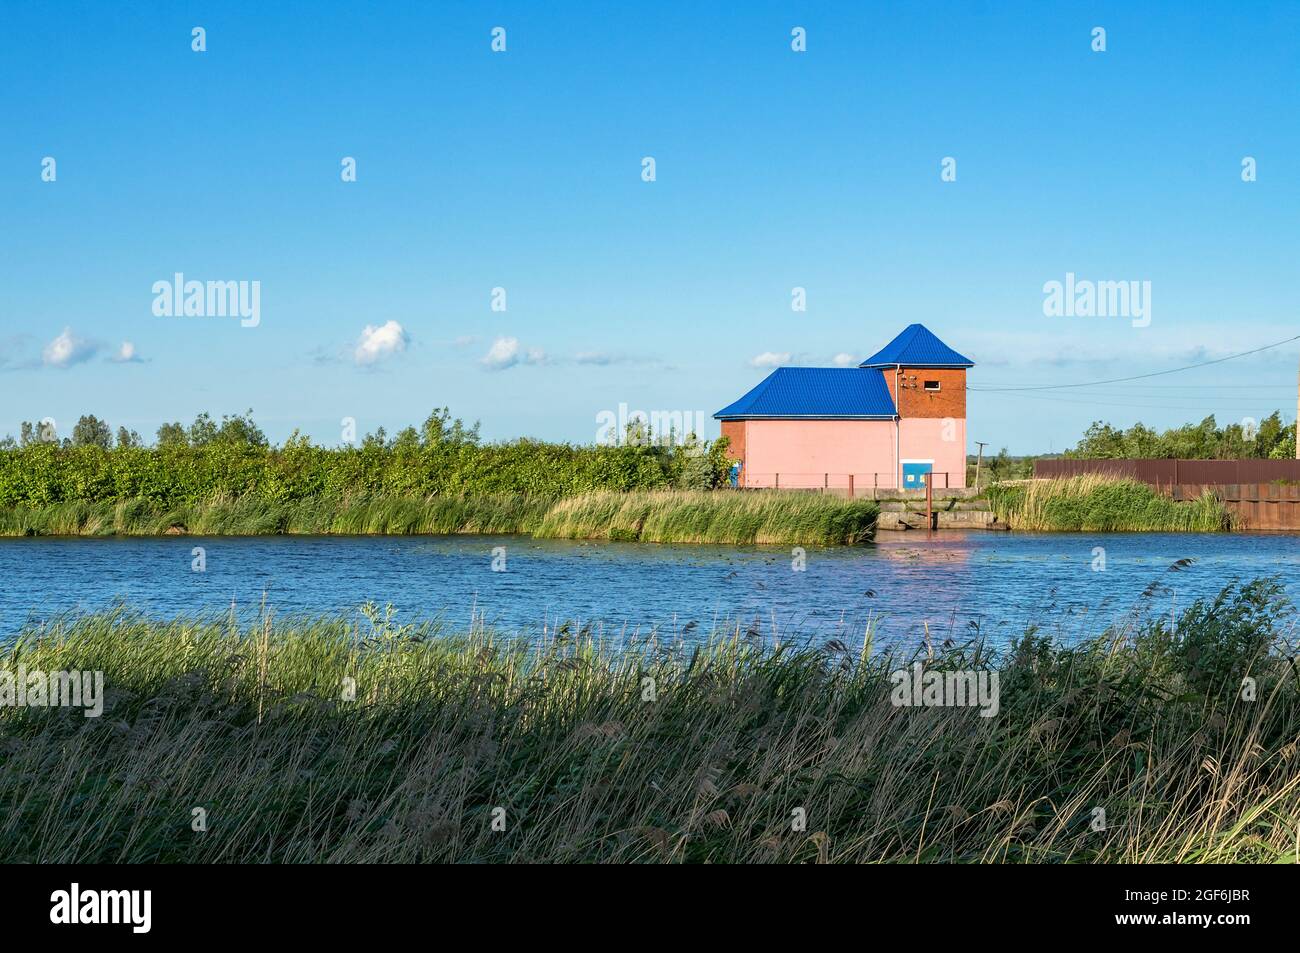 Little pink house on the river. The building is a pumping station. Technical building on the shore. Stock Photo